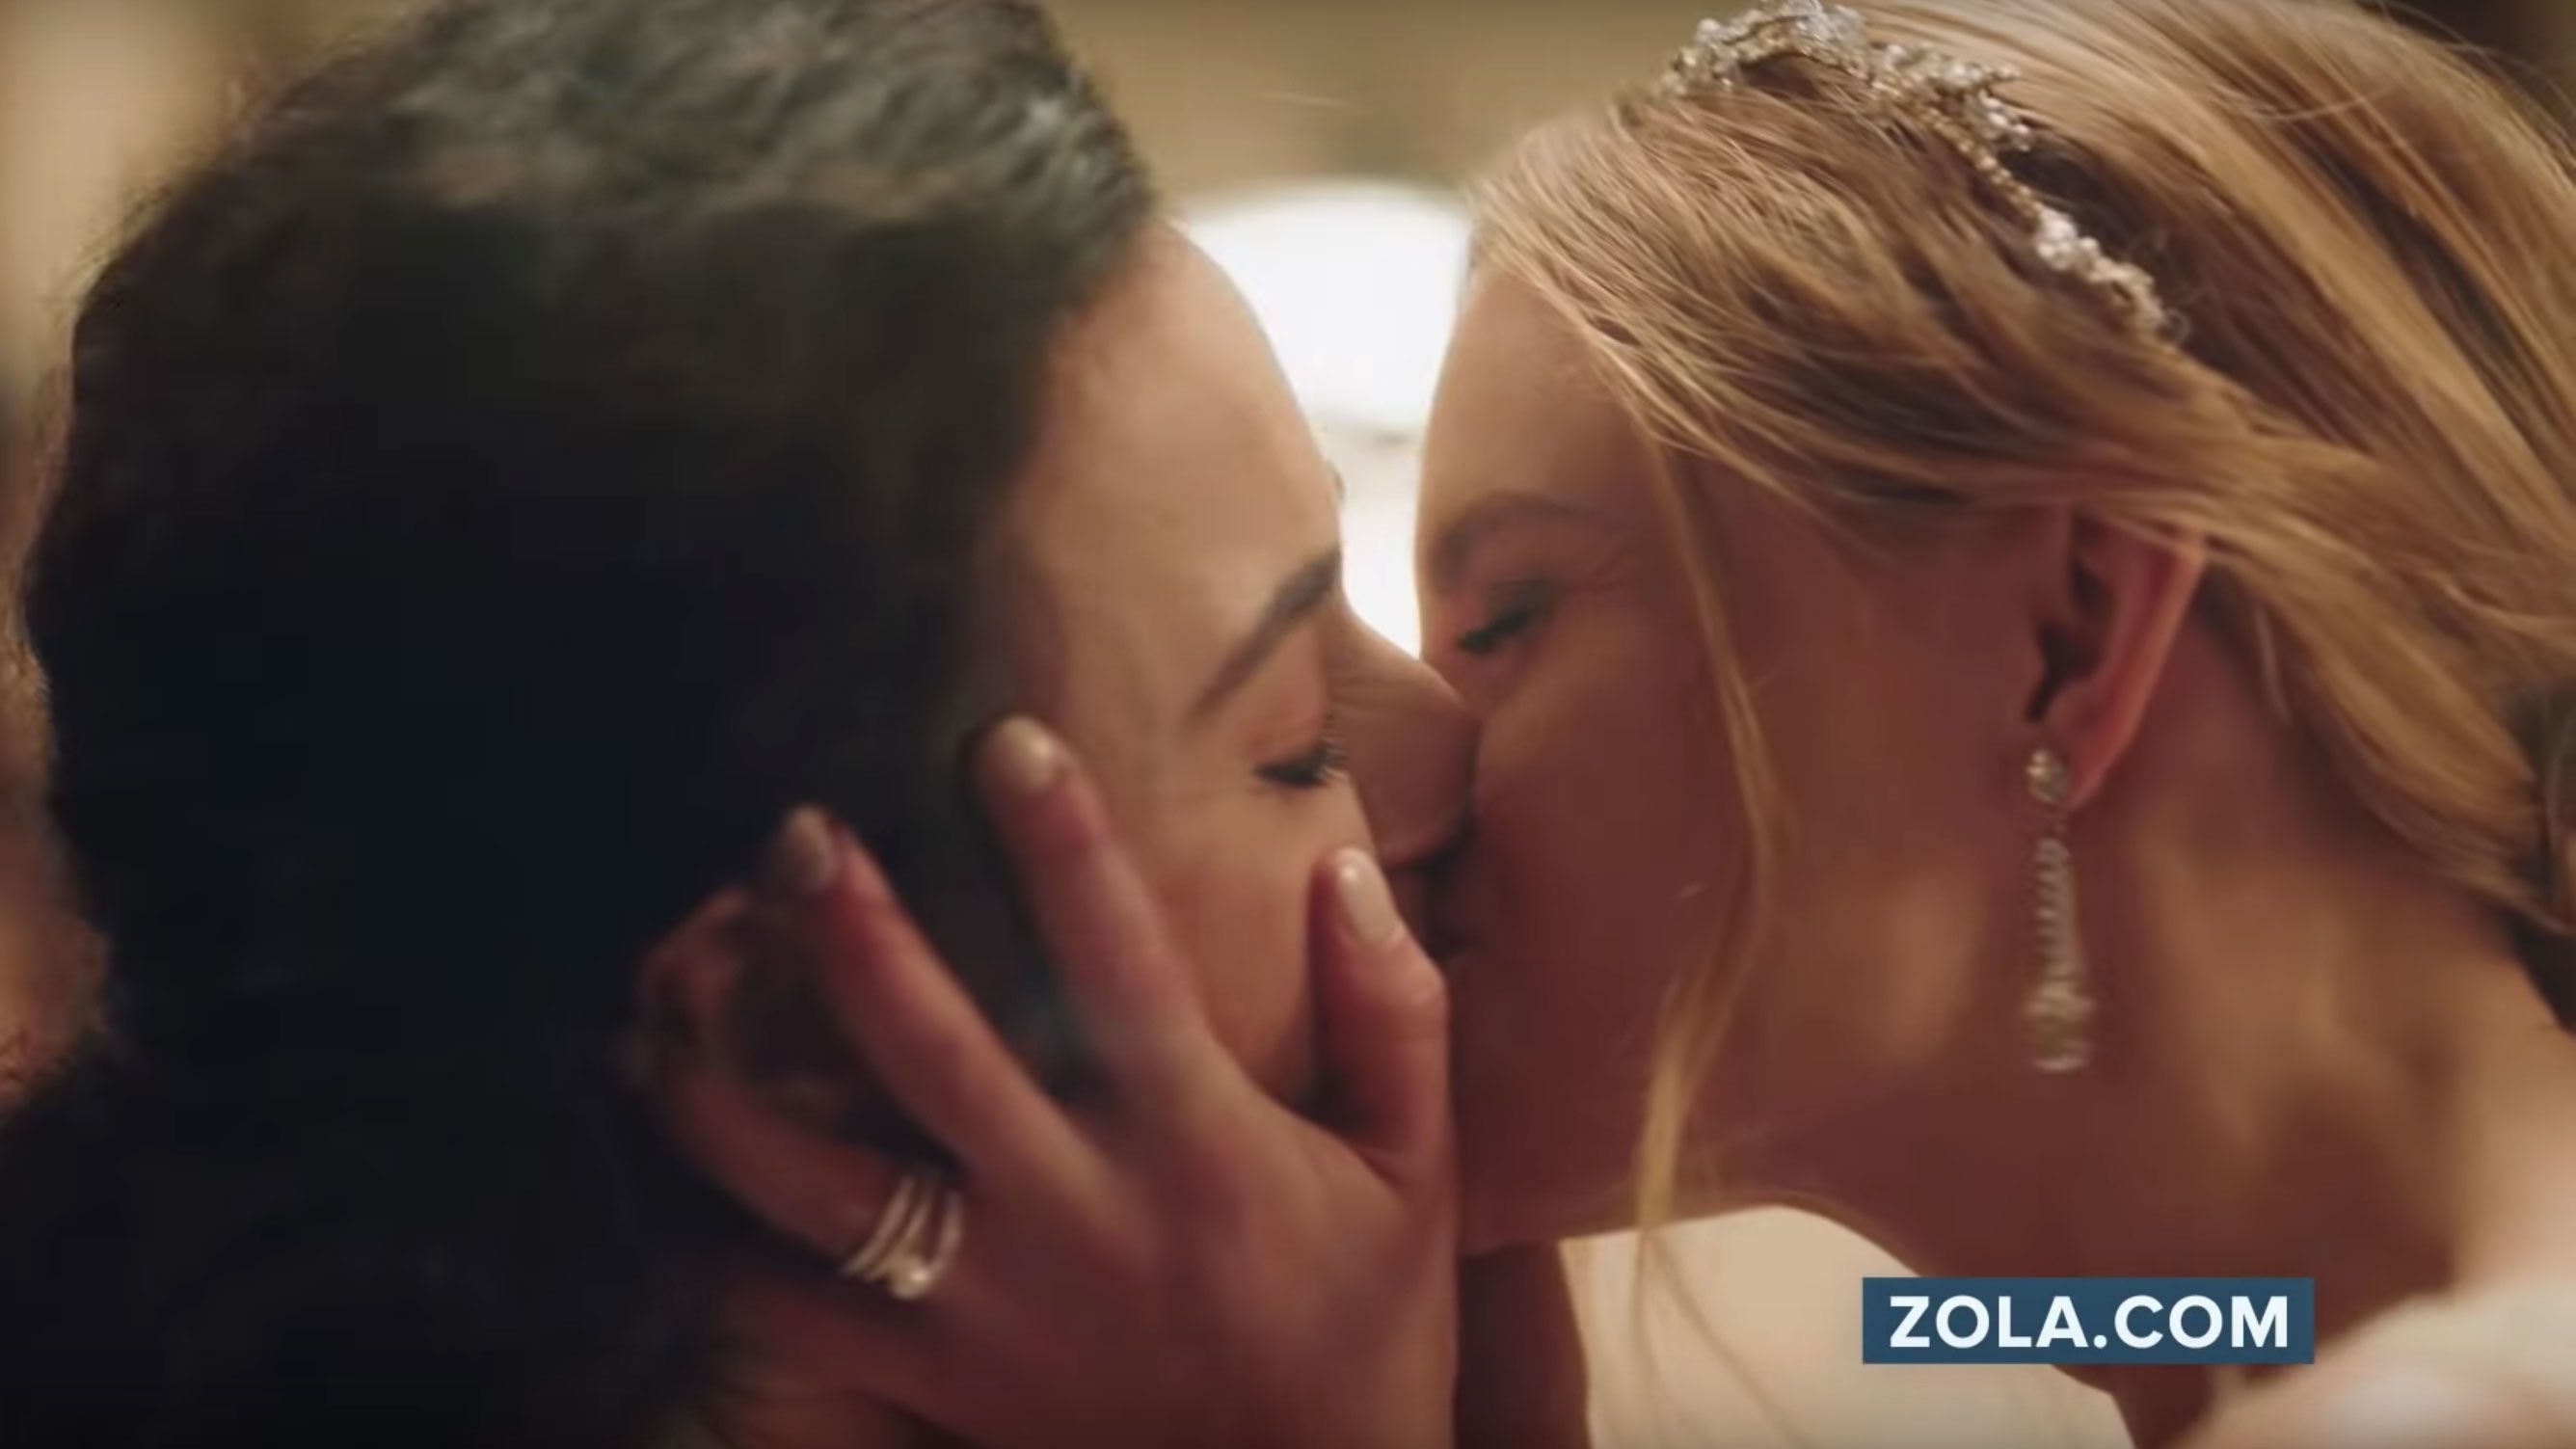 How gay couples in TV commercials became a mainstream phenomenon | CNN  Business